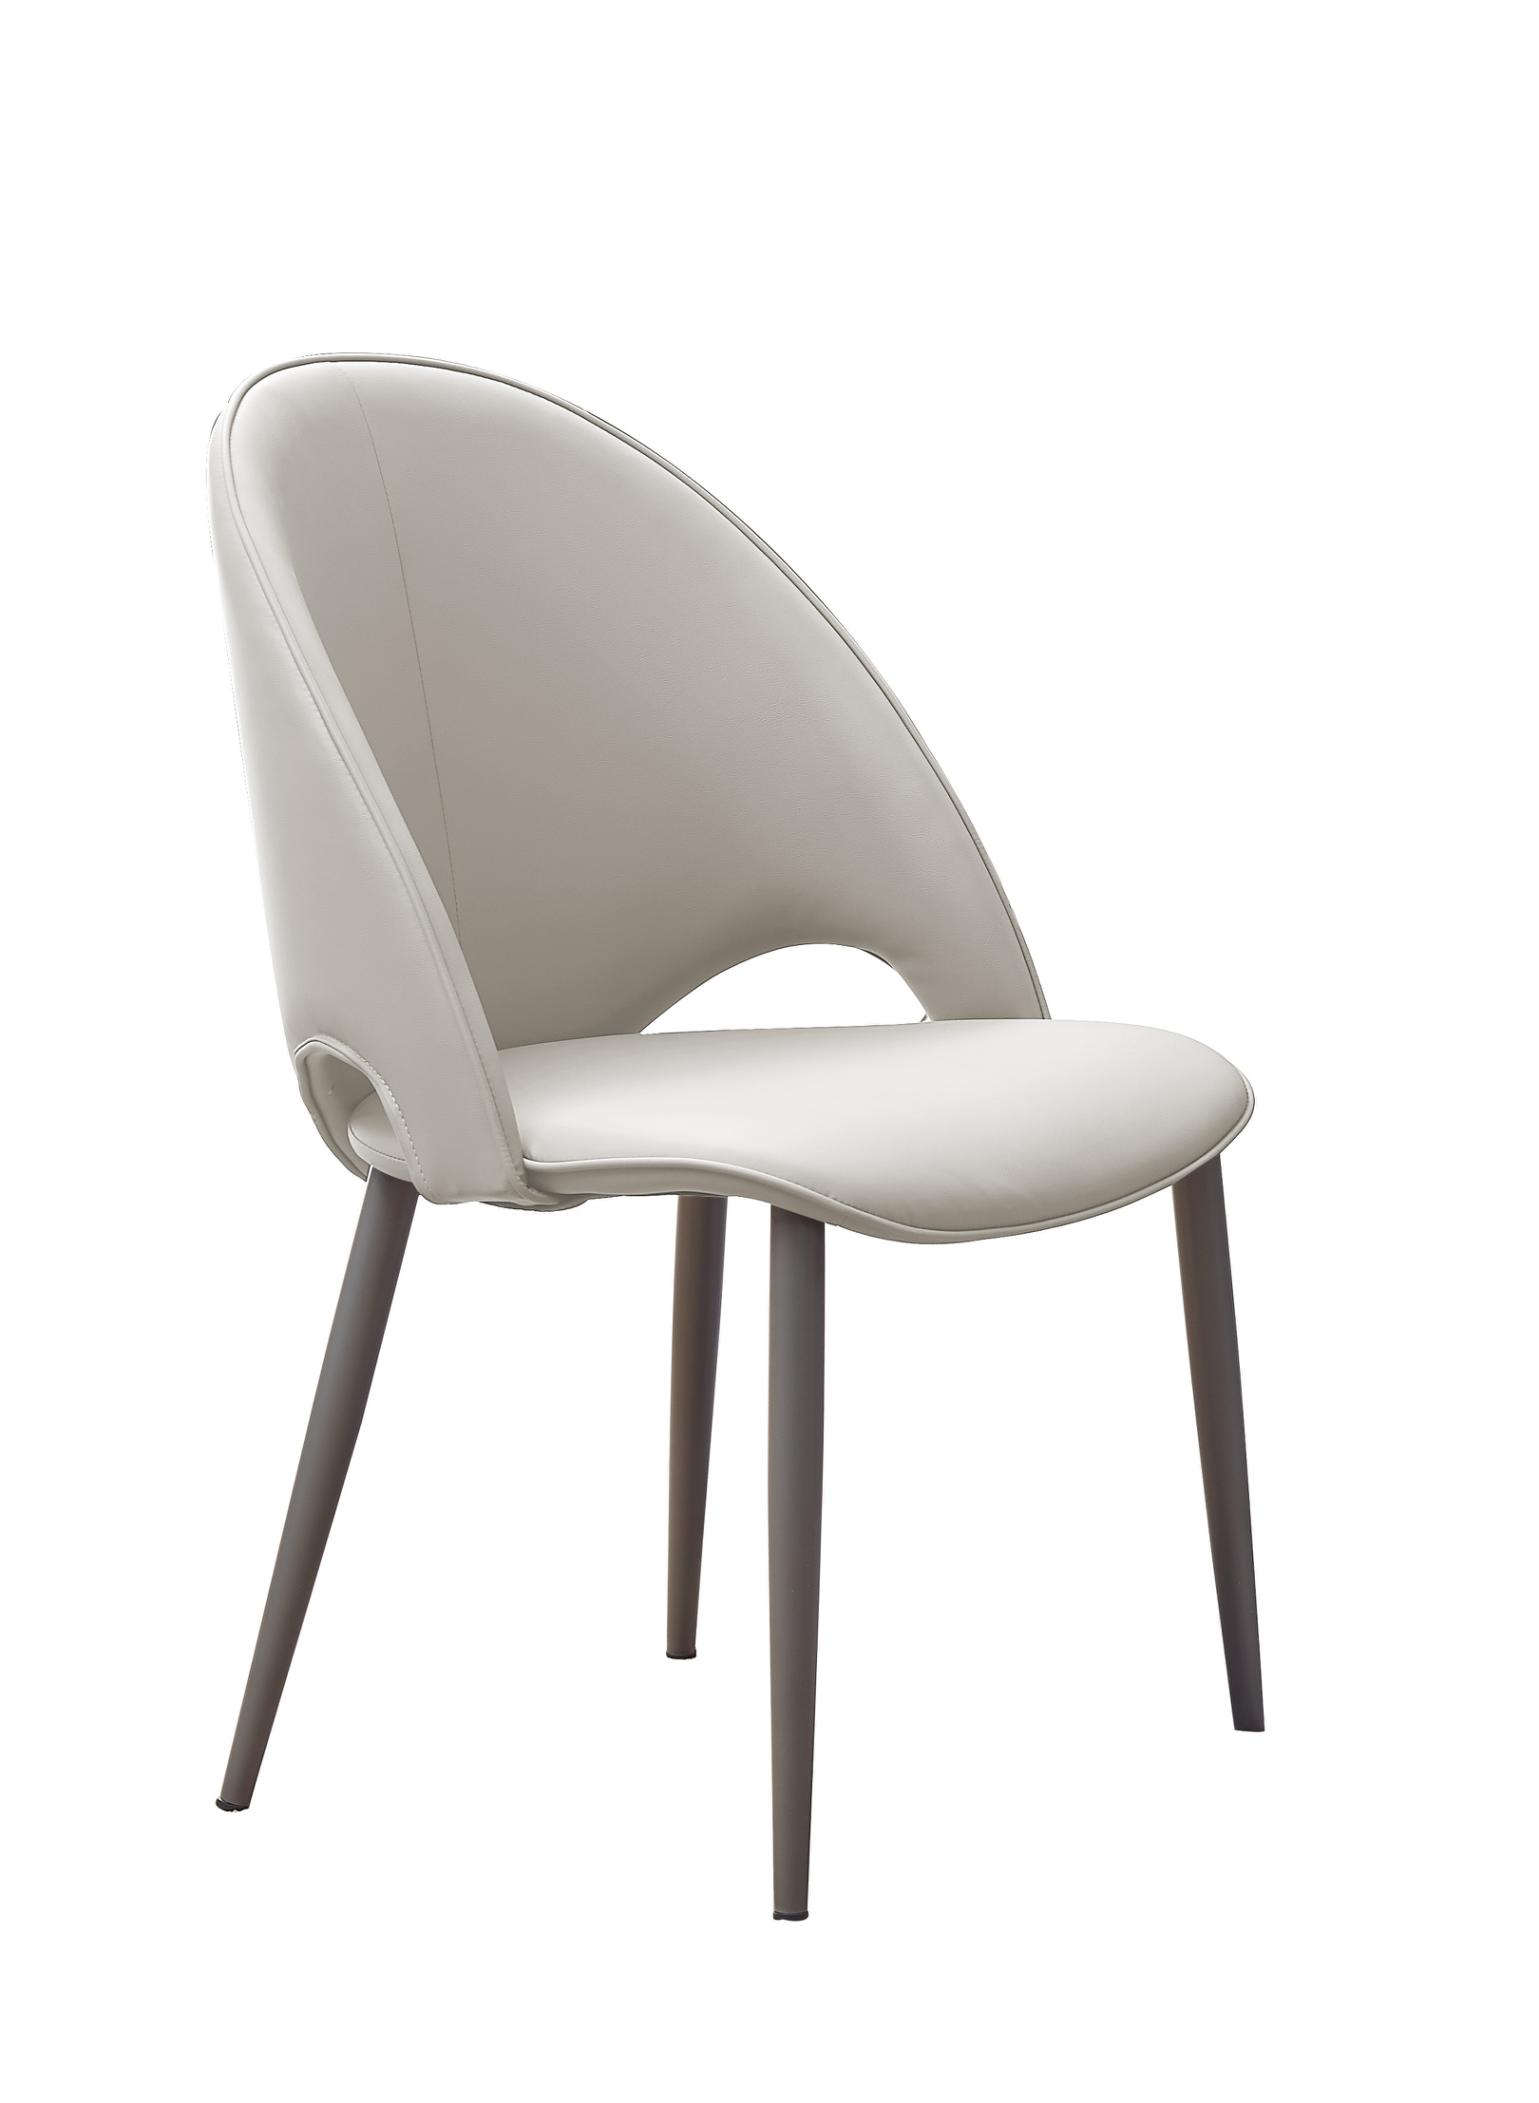 Savona Chair Pu Leather Upholstered With Metal Legs - White